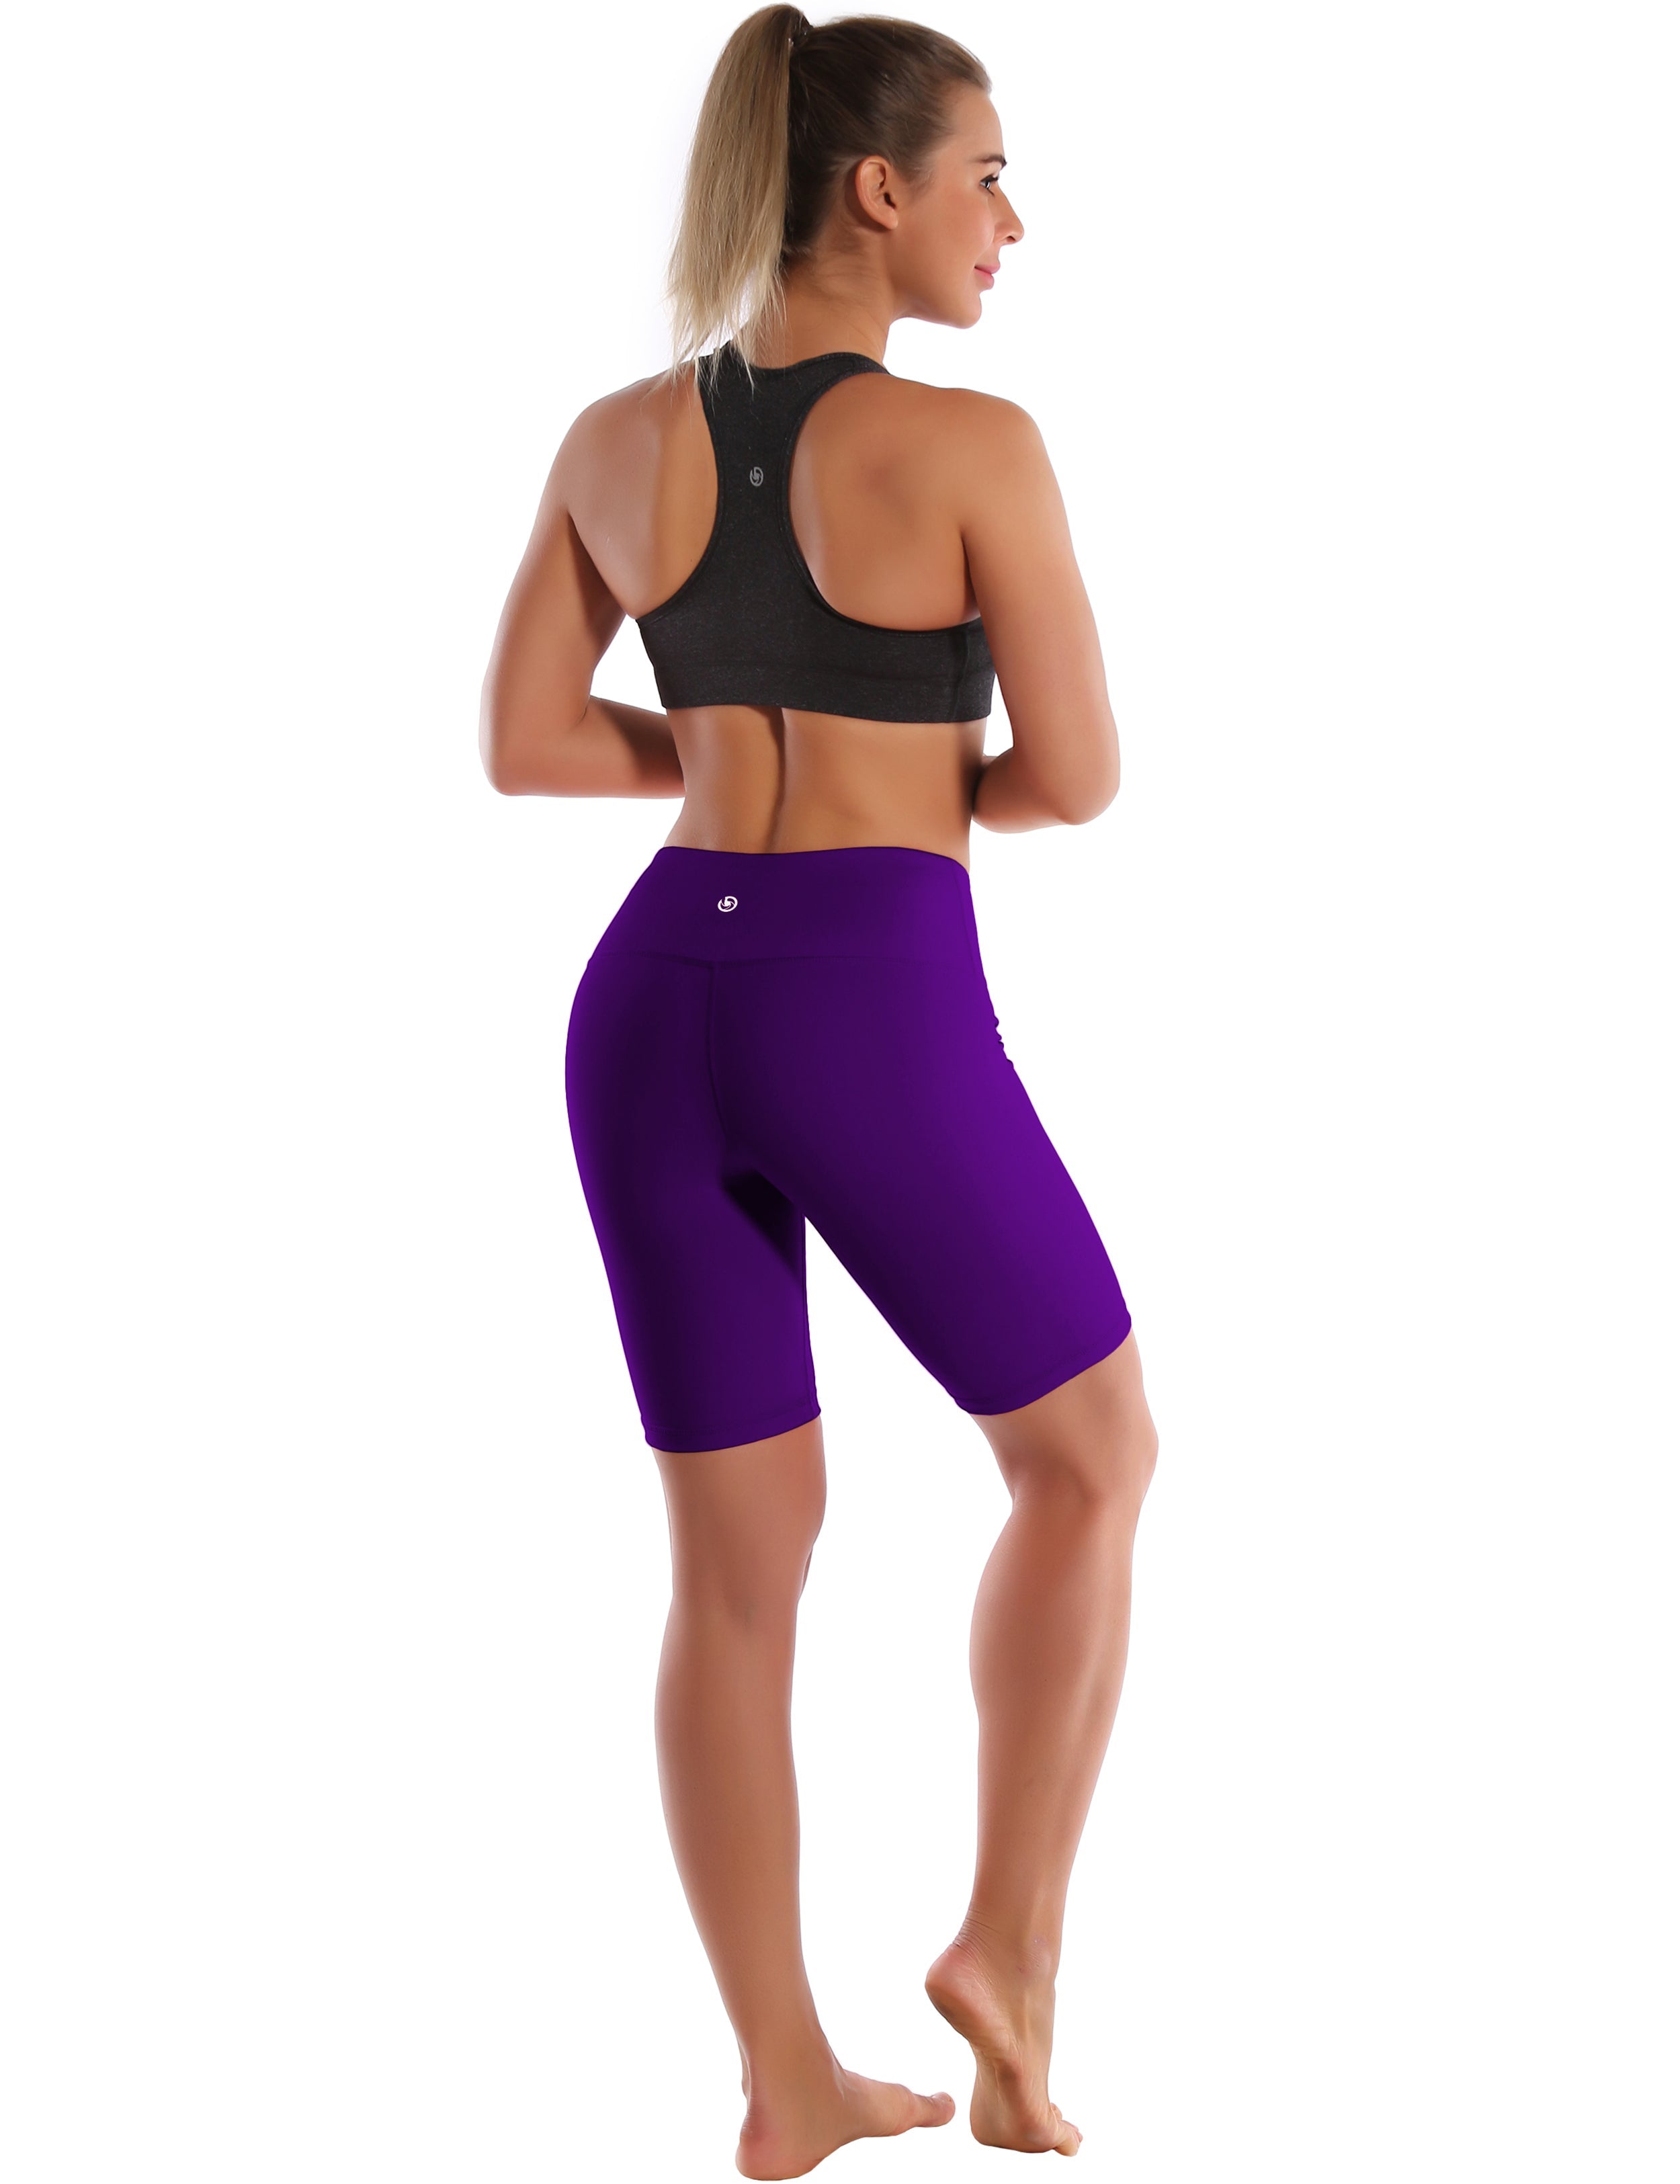 8" High Waist Running Shorts eggplantpurple Sleek, soft, smooth and totally comfortable: our newest style is here. Softest-ever fabric High elasticity High density 4-way stretch Fabric doesn't attract lint easily No see-through Moisture-wicking Machine wash 75% Nylon, 25% Spandex